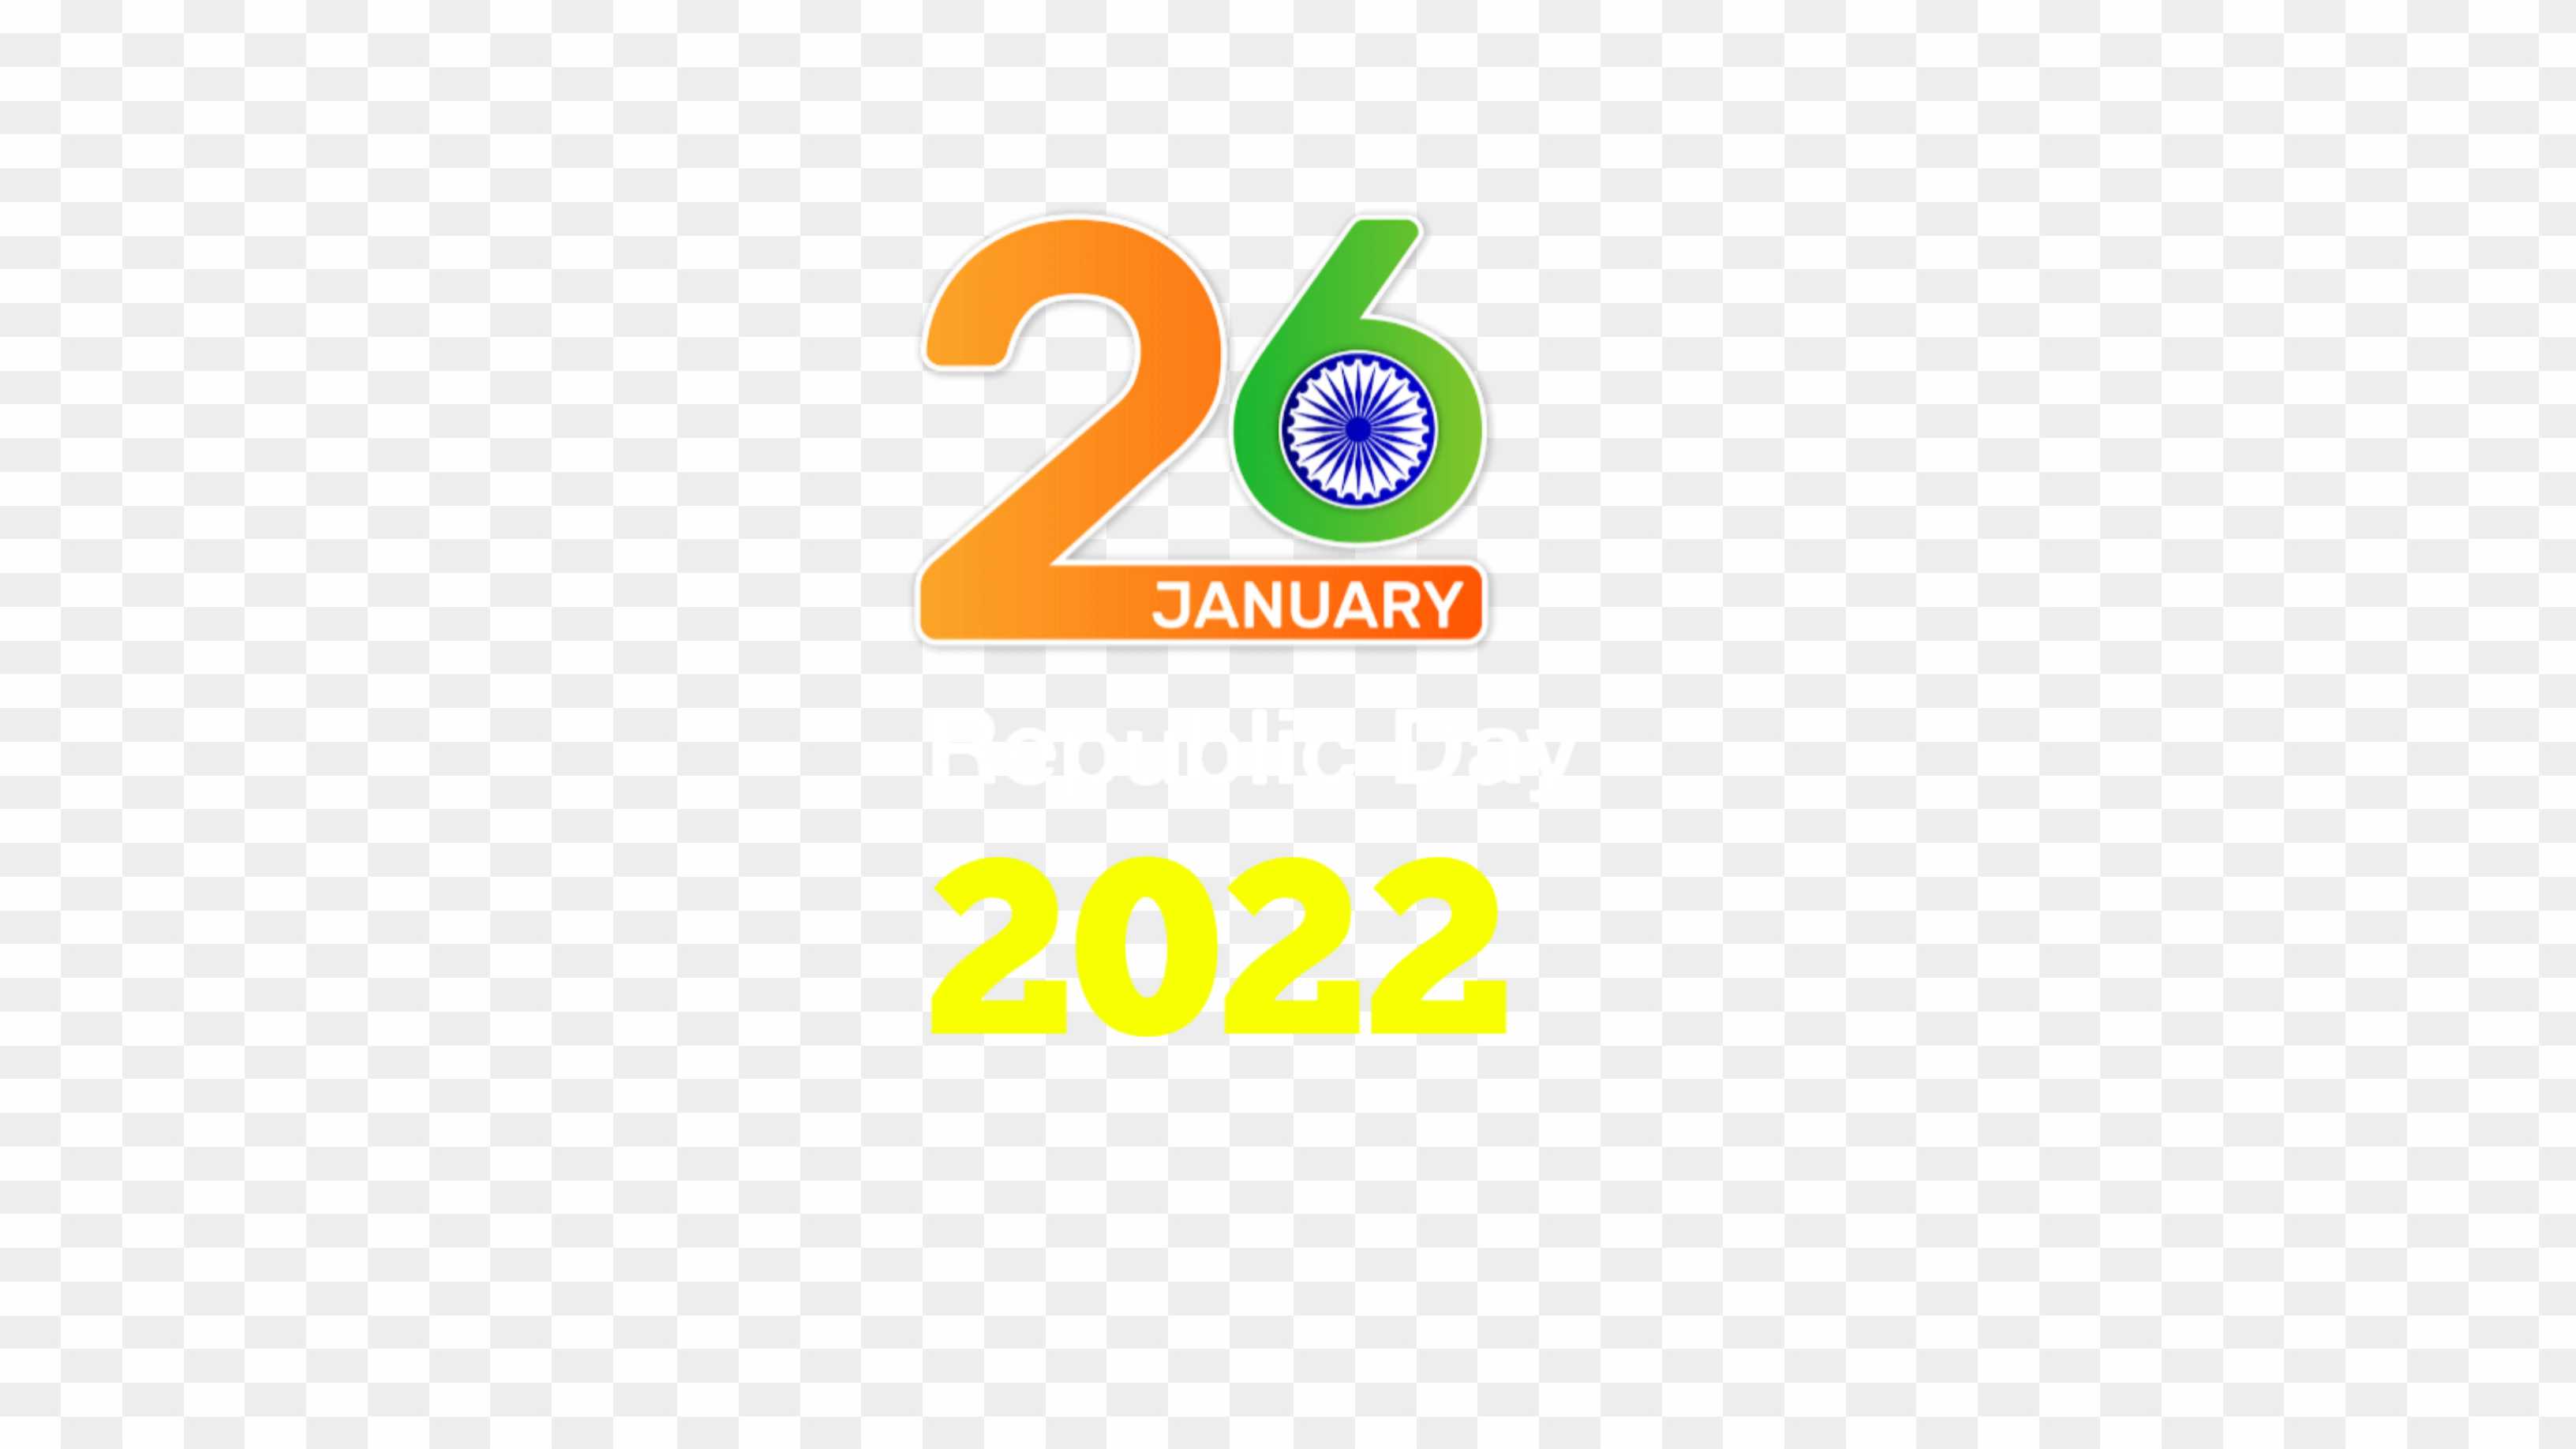 26 January 2022 png